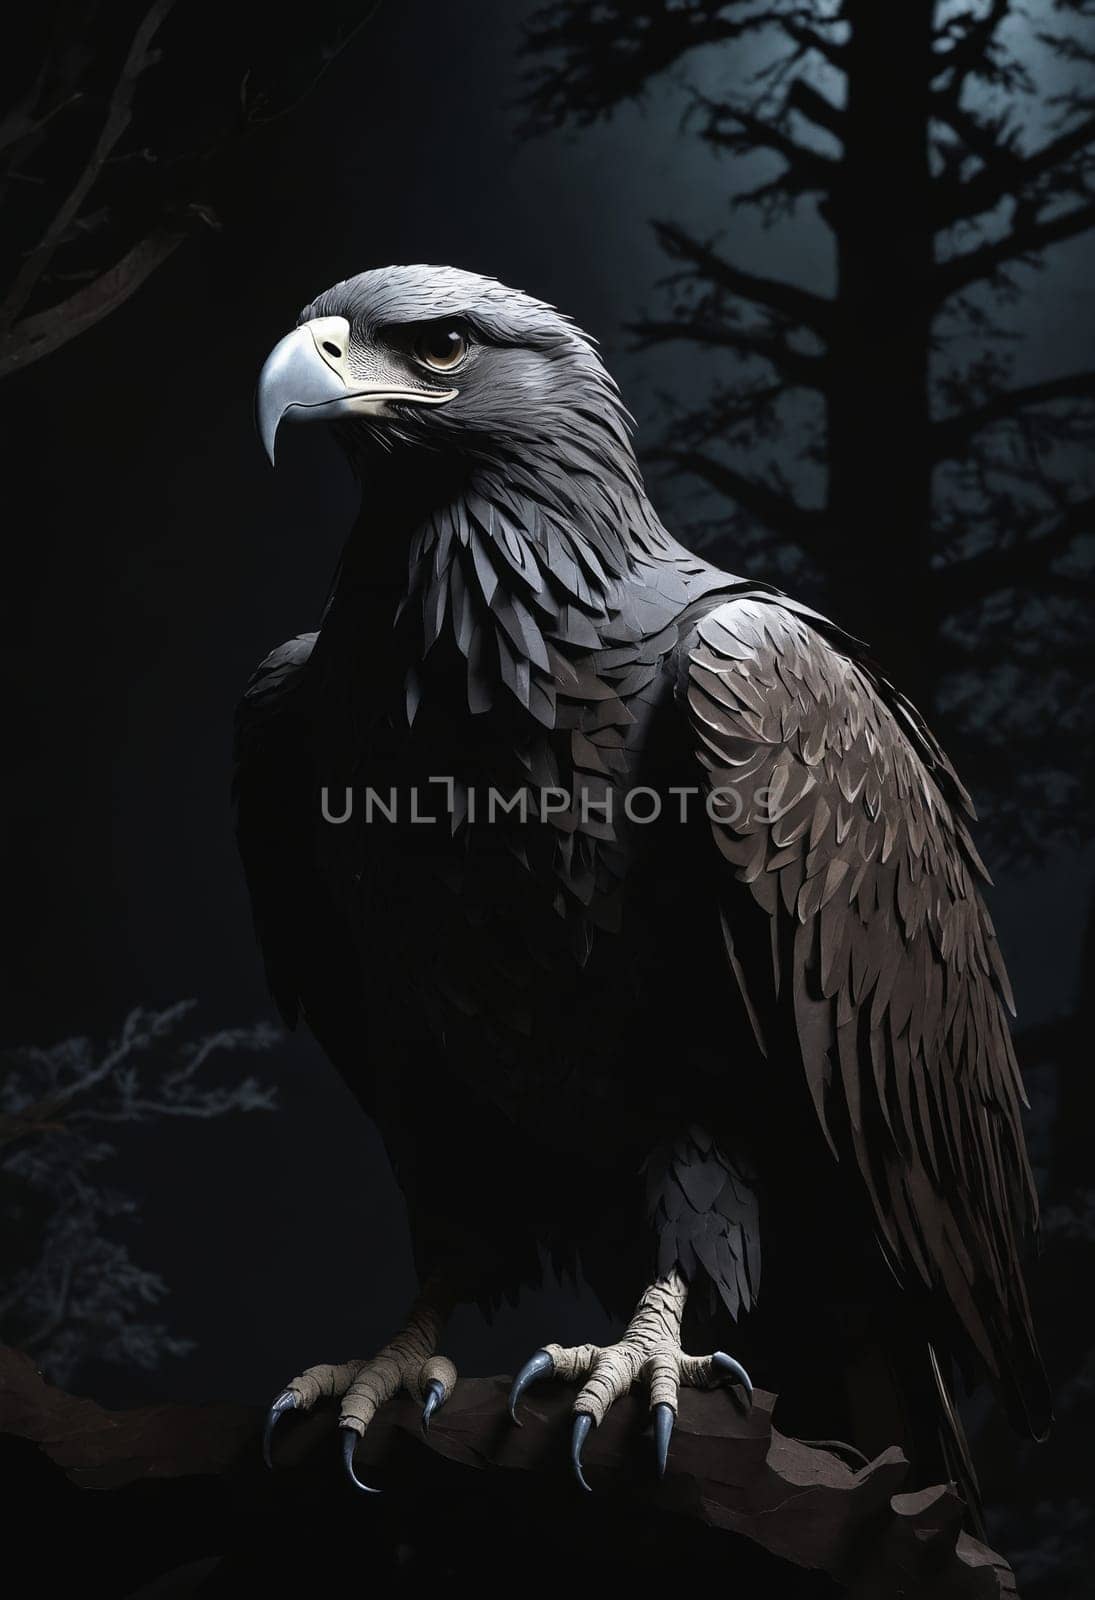 a black eagle is sitting in the dark looking at the camera by Andre1ns